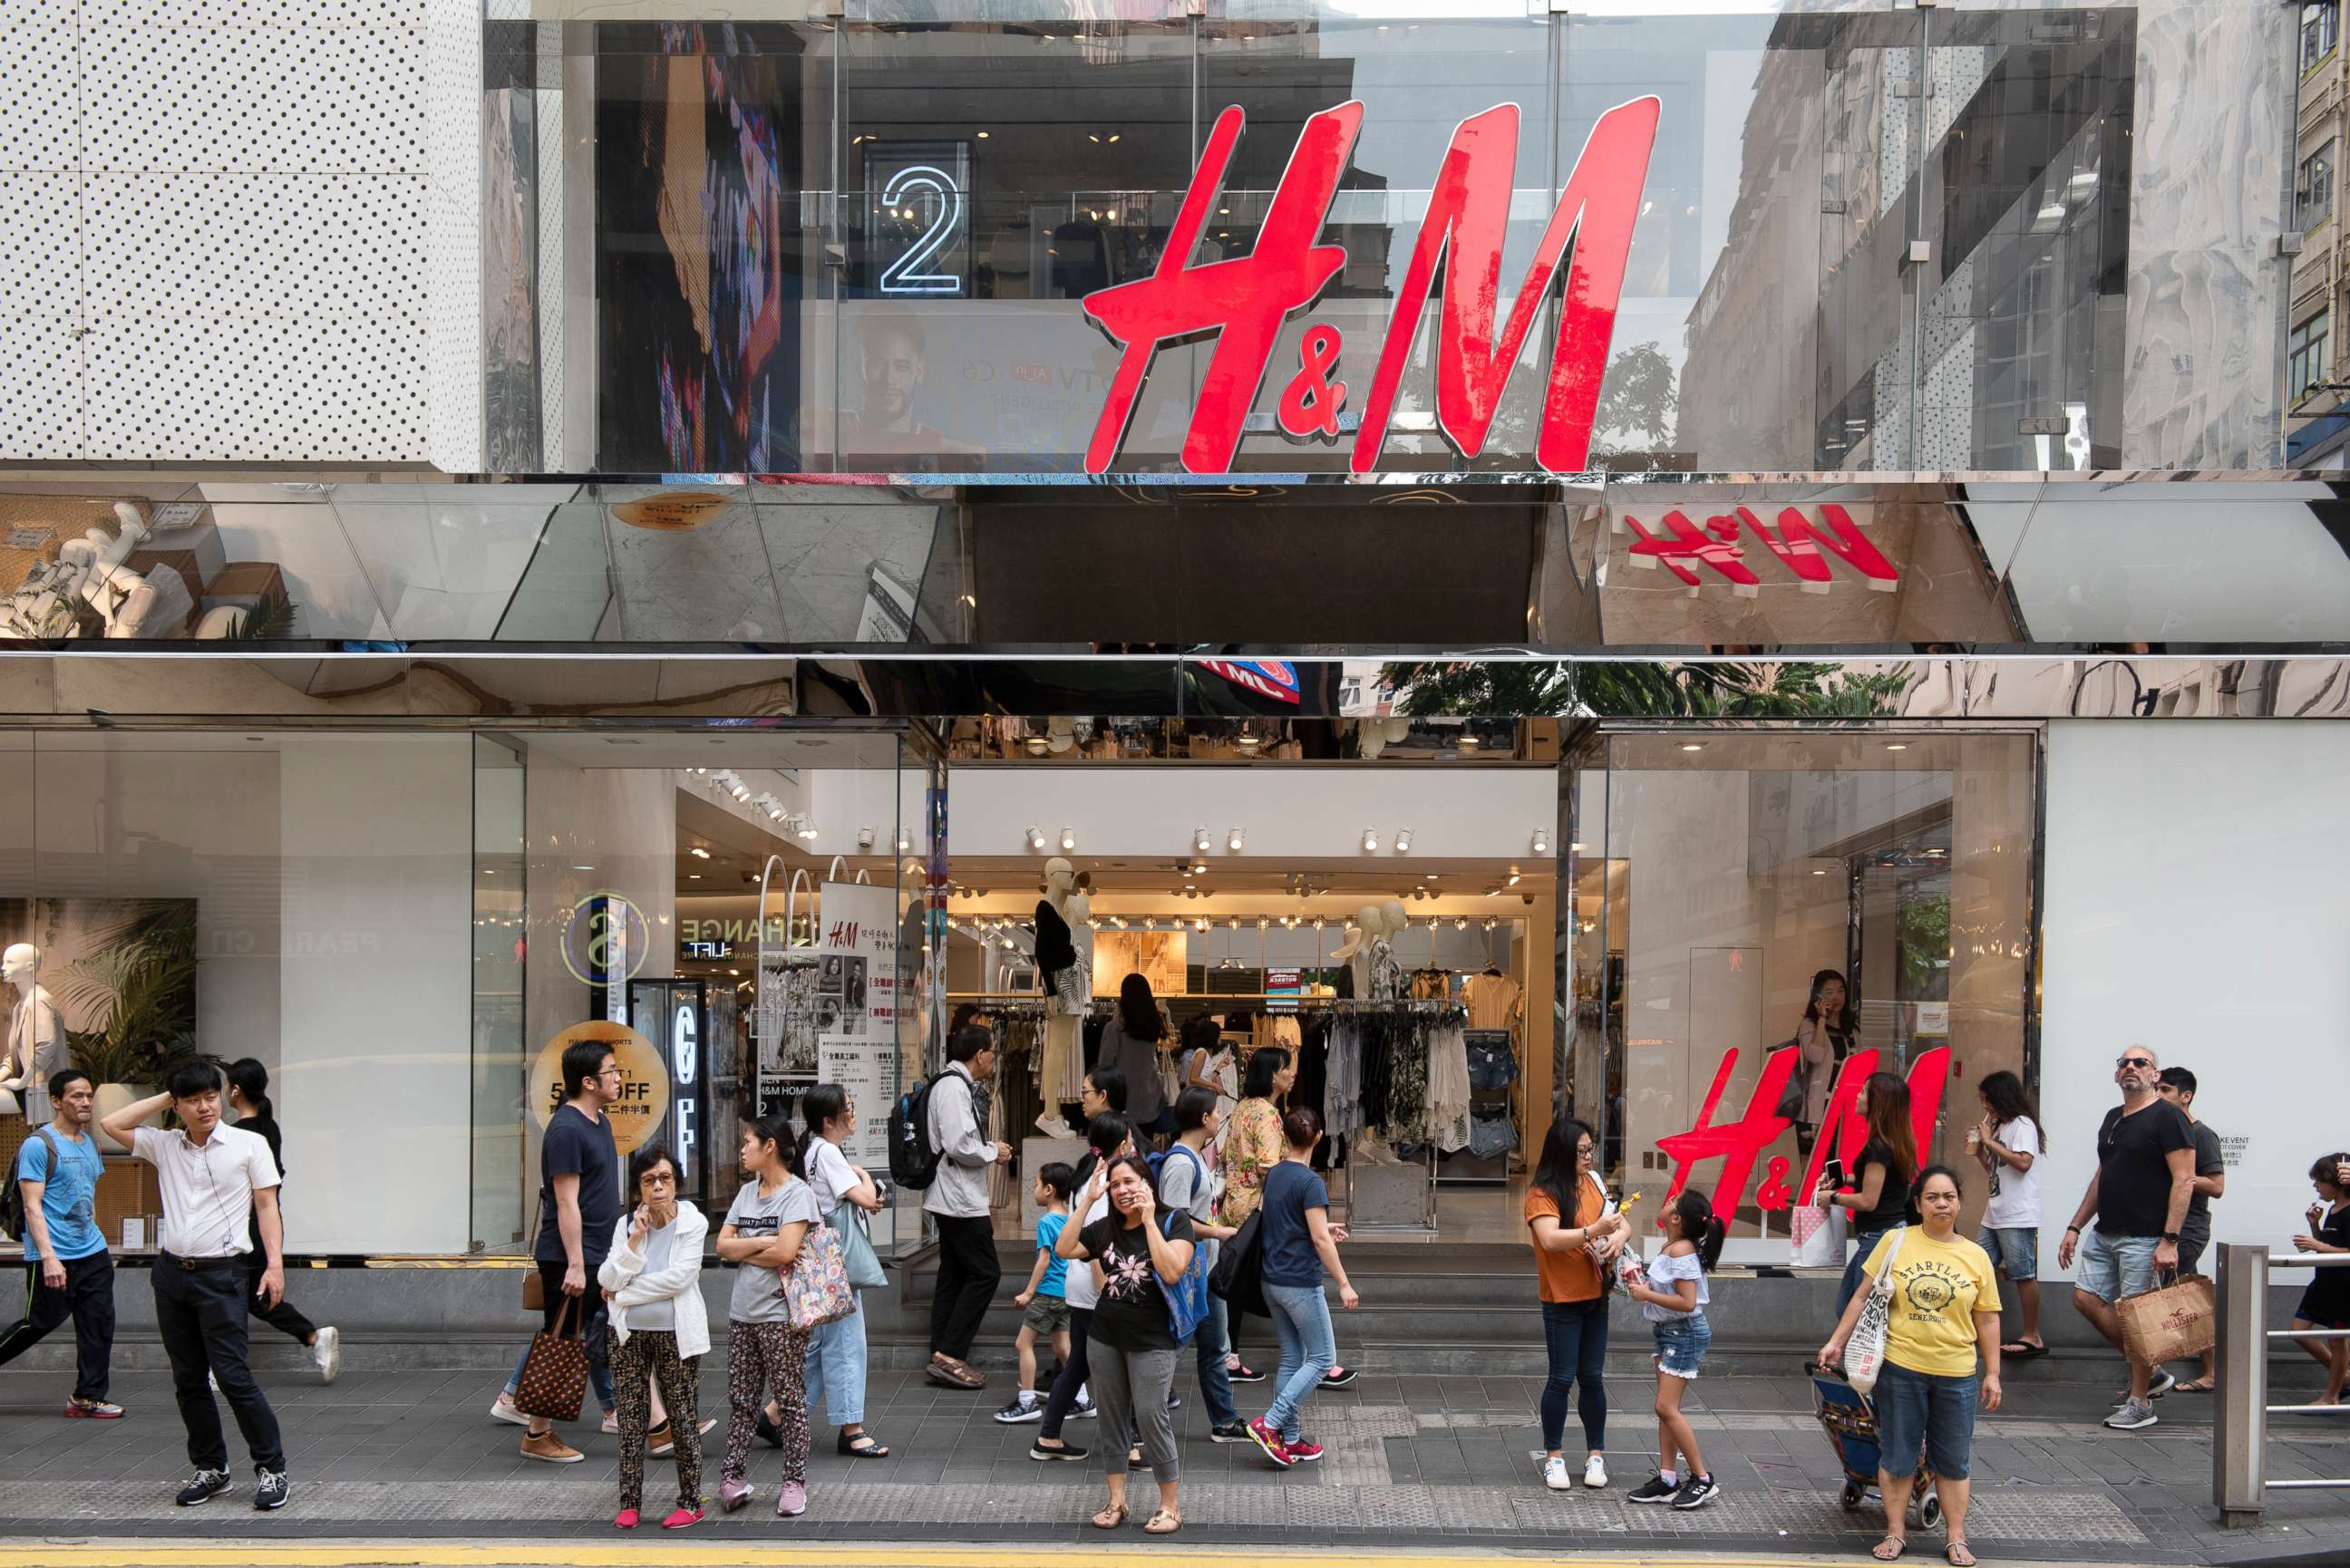 Mountains of garments promised to be reused by brands like H&M are